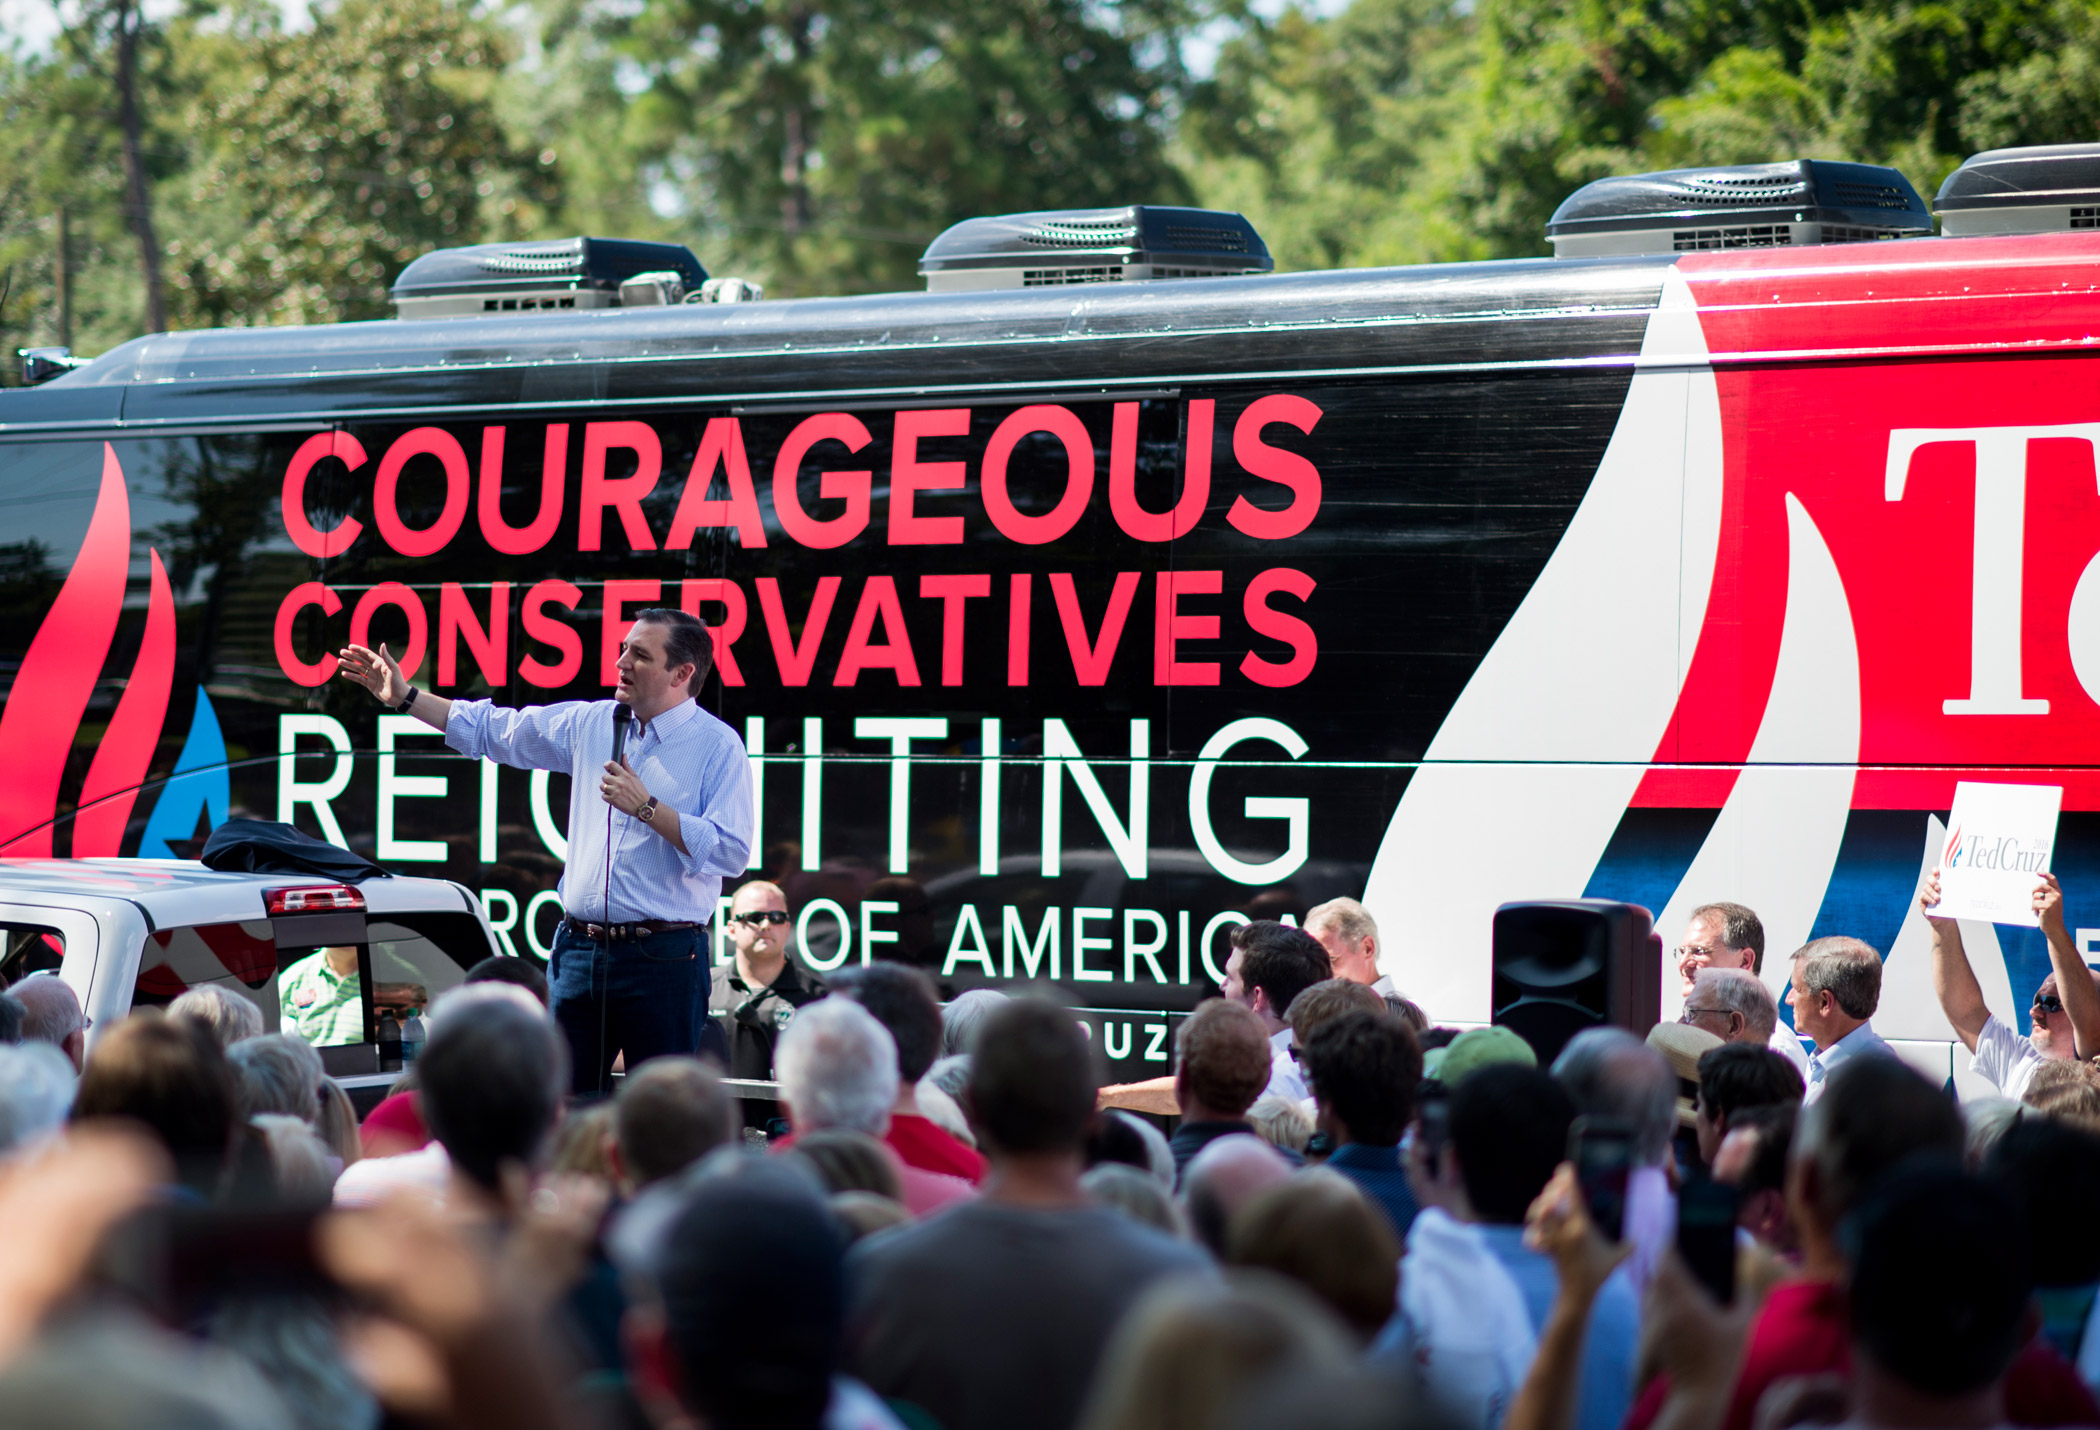 Republican presidential candidate Sen. Ted Cruz speaks to supporters in front of his campaign bus in Newnan, Ga., on Aug. 8, 2015.